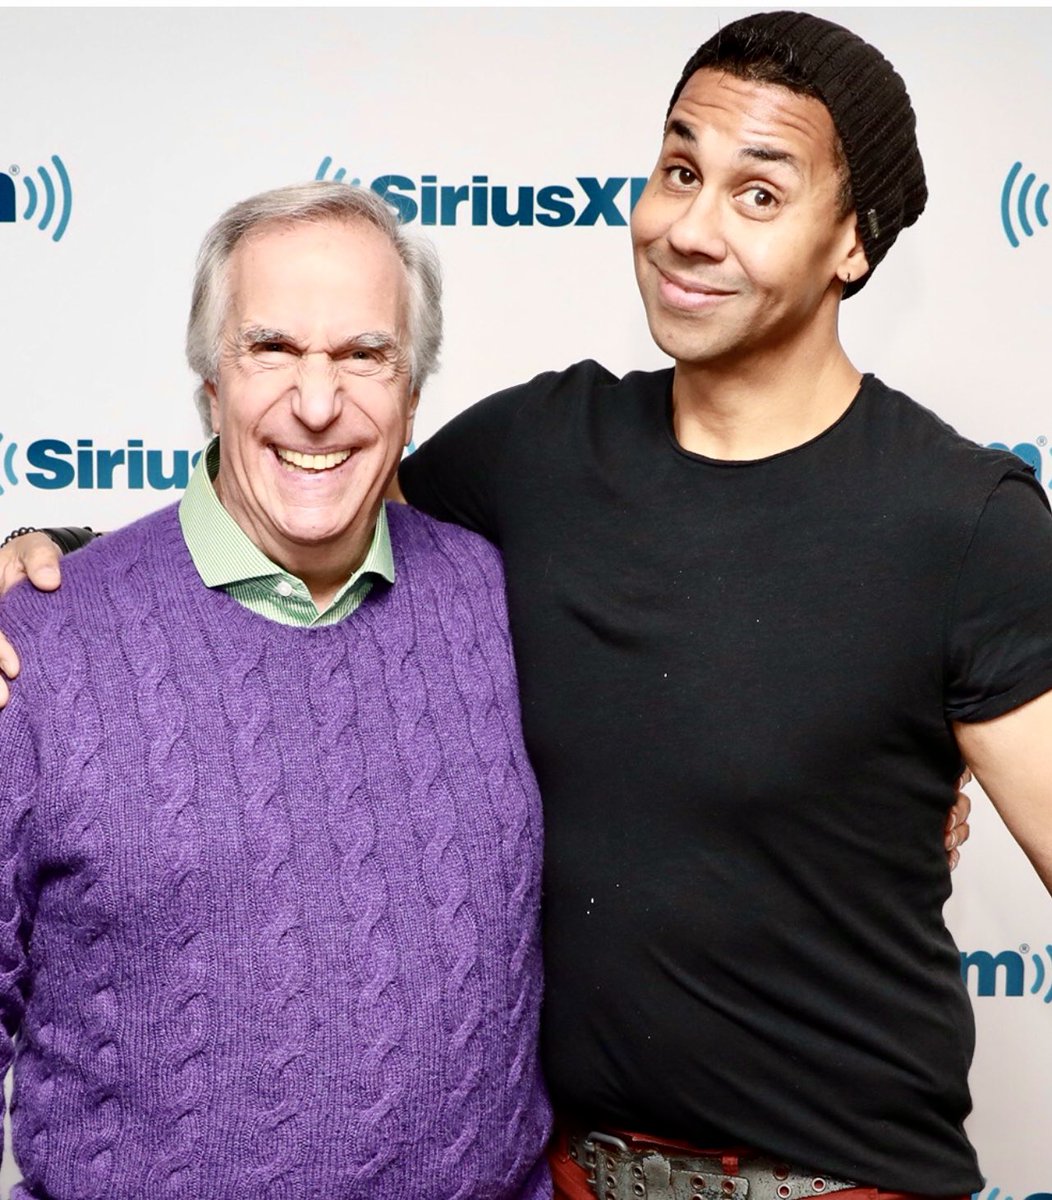 #FBF #Barry? Great yeah, but he will always be Arthur Fonzerelli to ME! #Fonz #Fonzie #happydays  multiple #adamsandler #films, an #icon, and just the sweetest, nicest man! The GREAT #henrywinkler #LEGEND #actor he told me to “sit on it”, life complete 😂